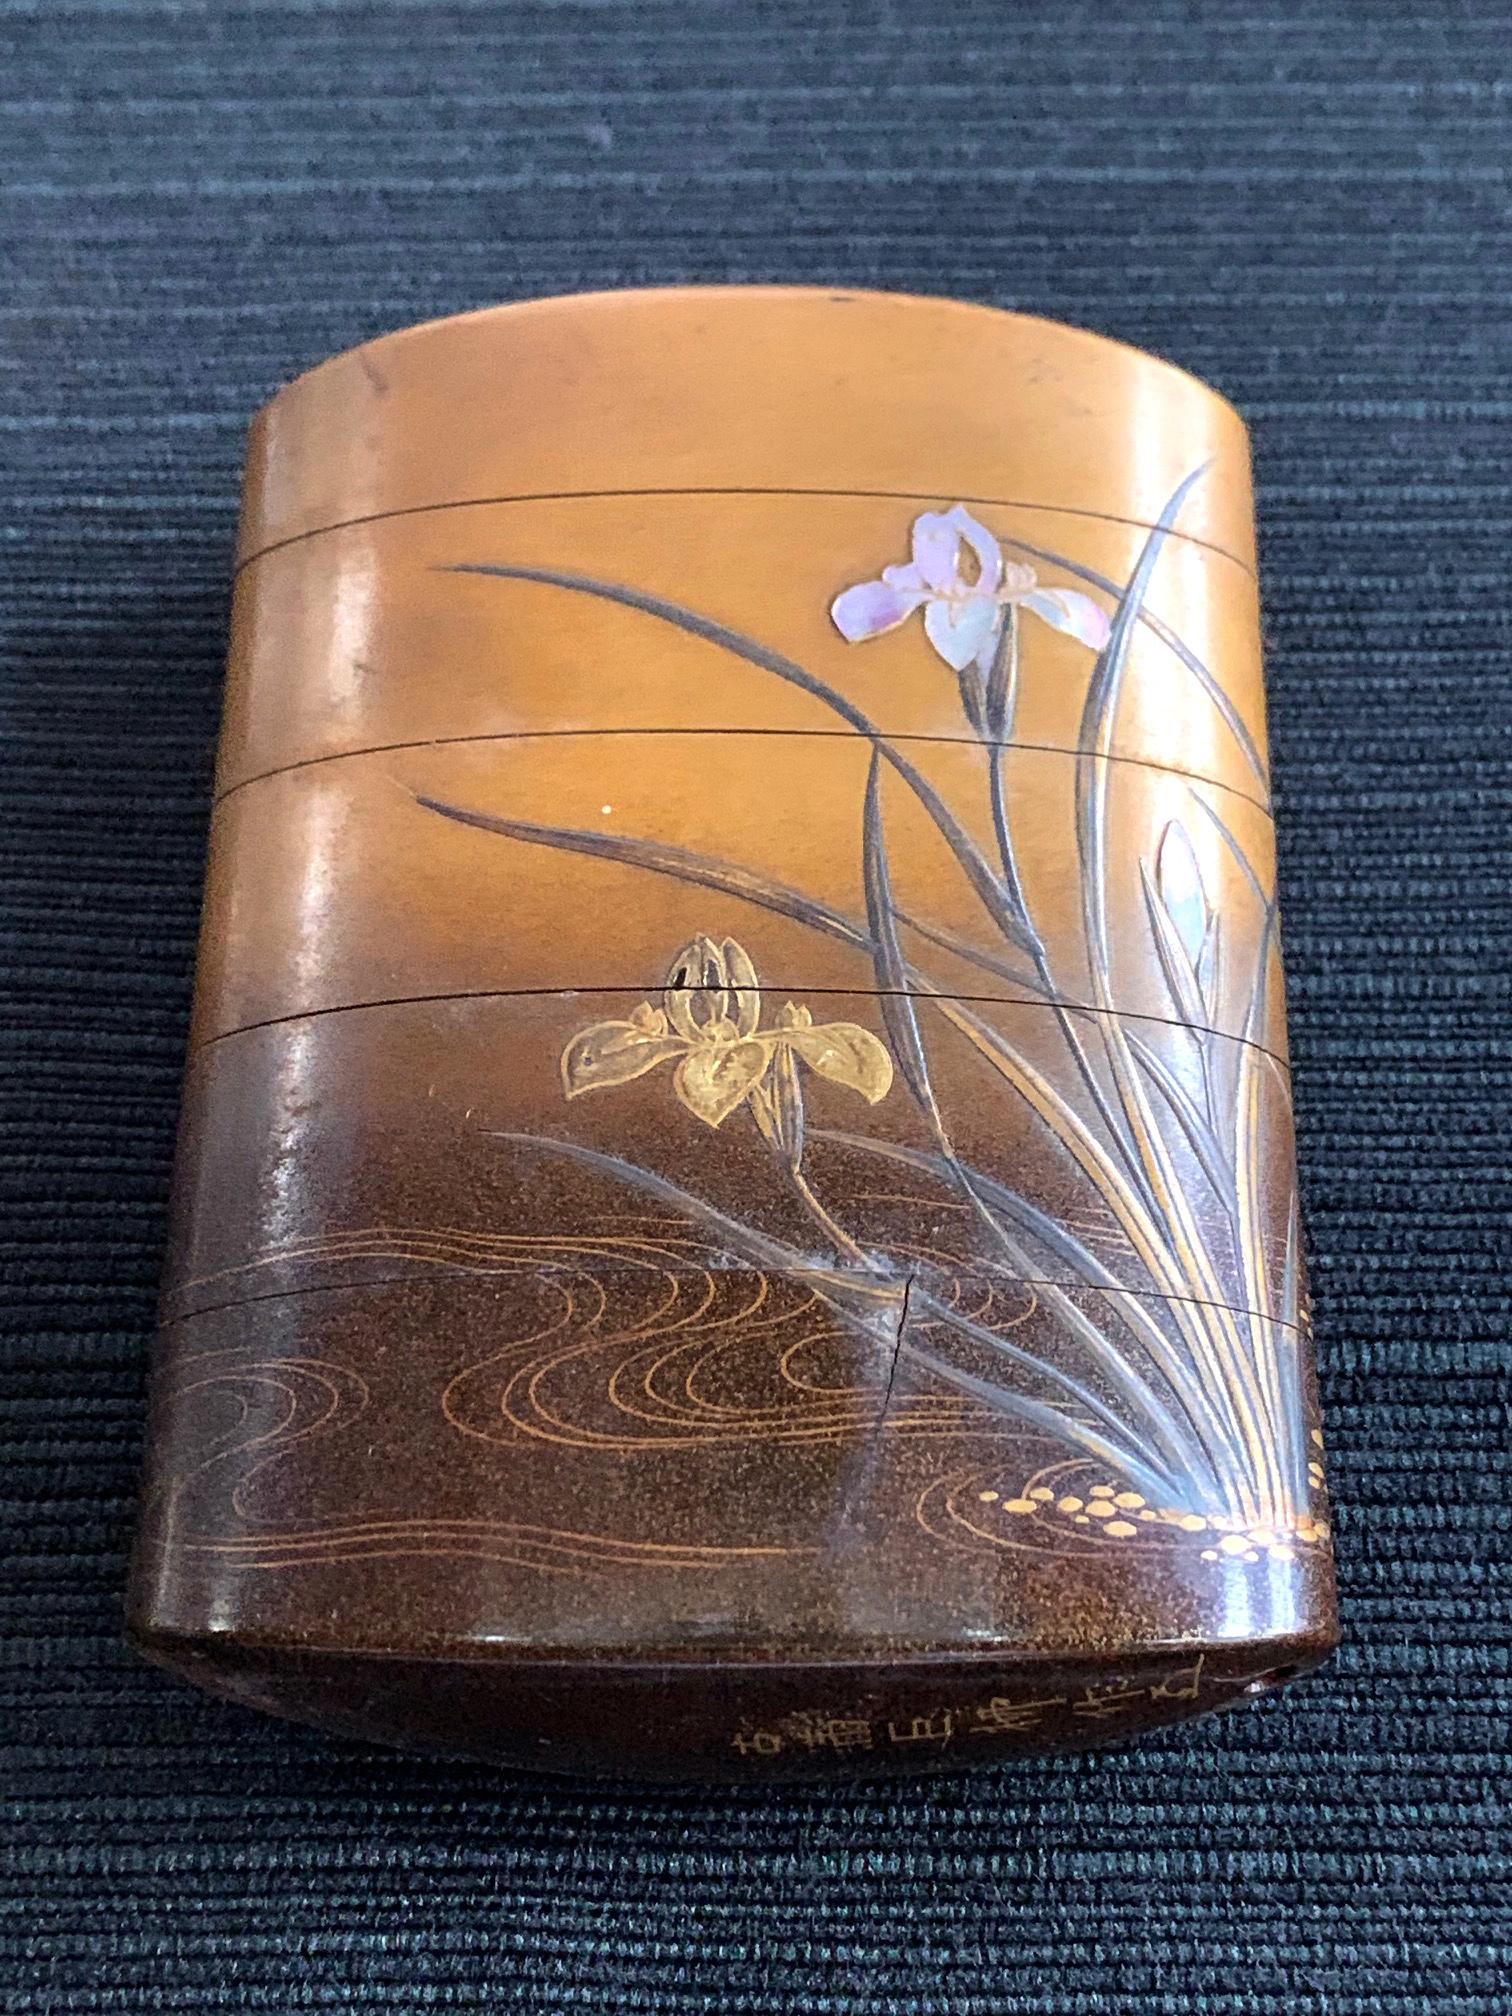 A four-case lacquered inro by Koma Koryu circa 19th century late Edo period. The inro features a pair of Chinese mandarin duck resting under a bundle of blooming irises on the pond. Hiramaki-e and takamaki-e and raden (mother-of-pearl) shell inlay